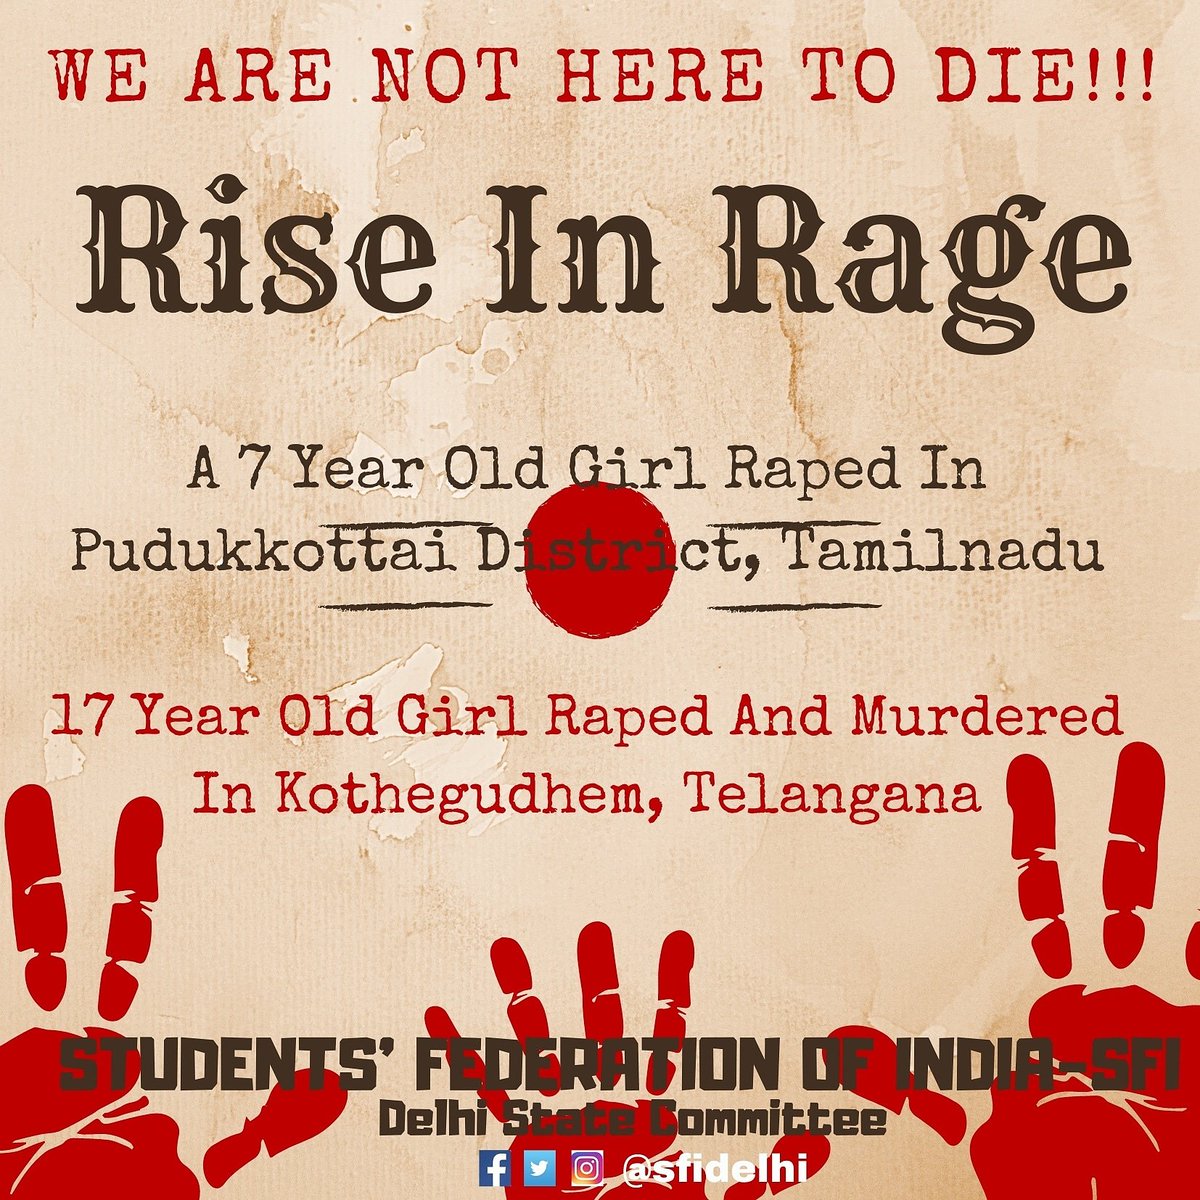 We are not here to die!!!
Rise In Rage!

#stoprapeculture
#dignity